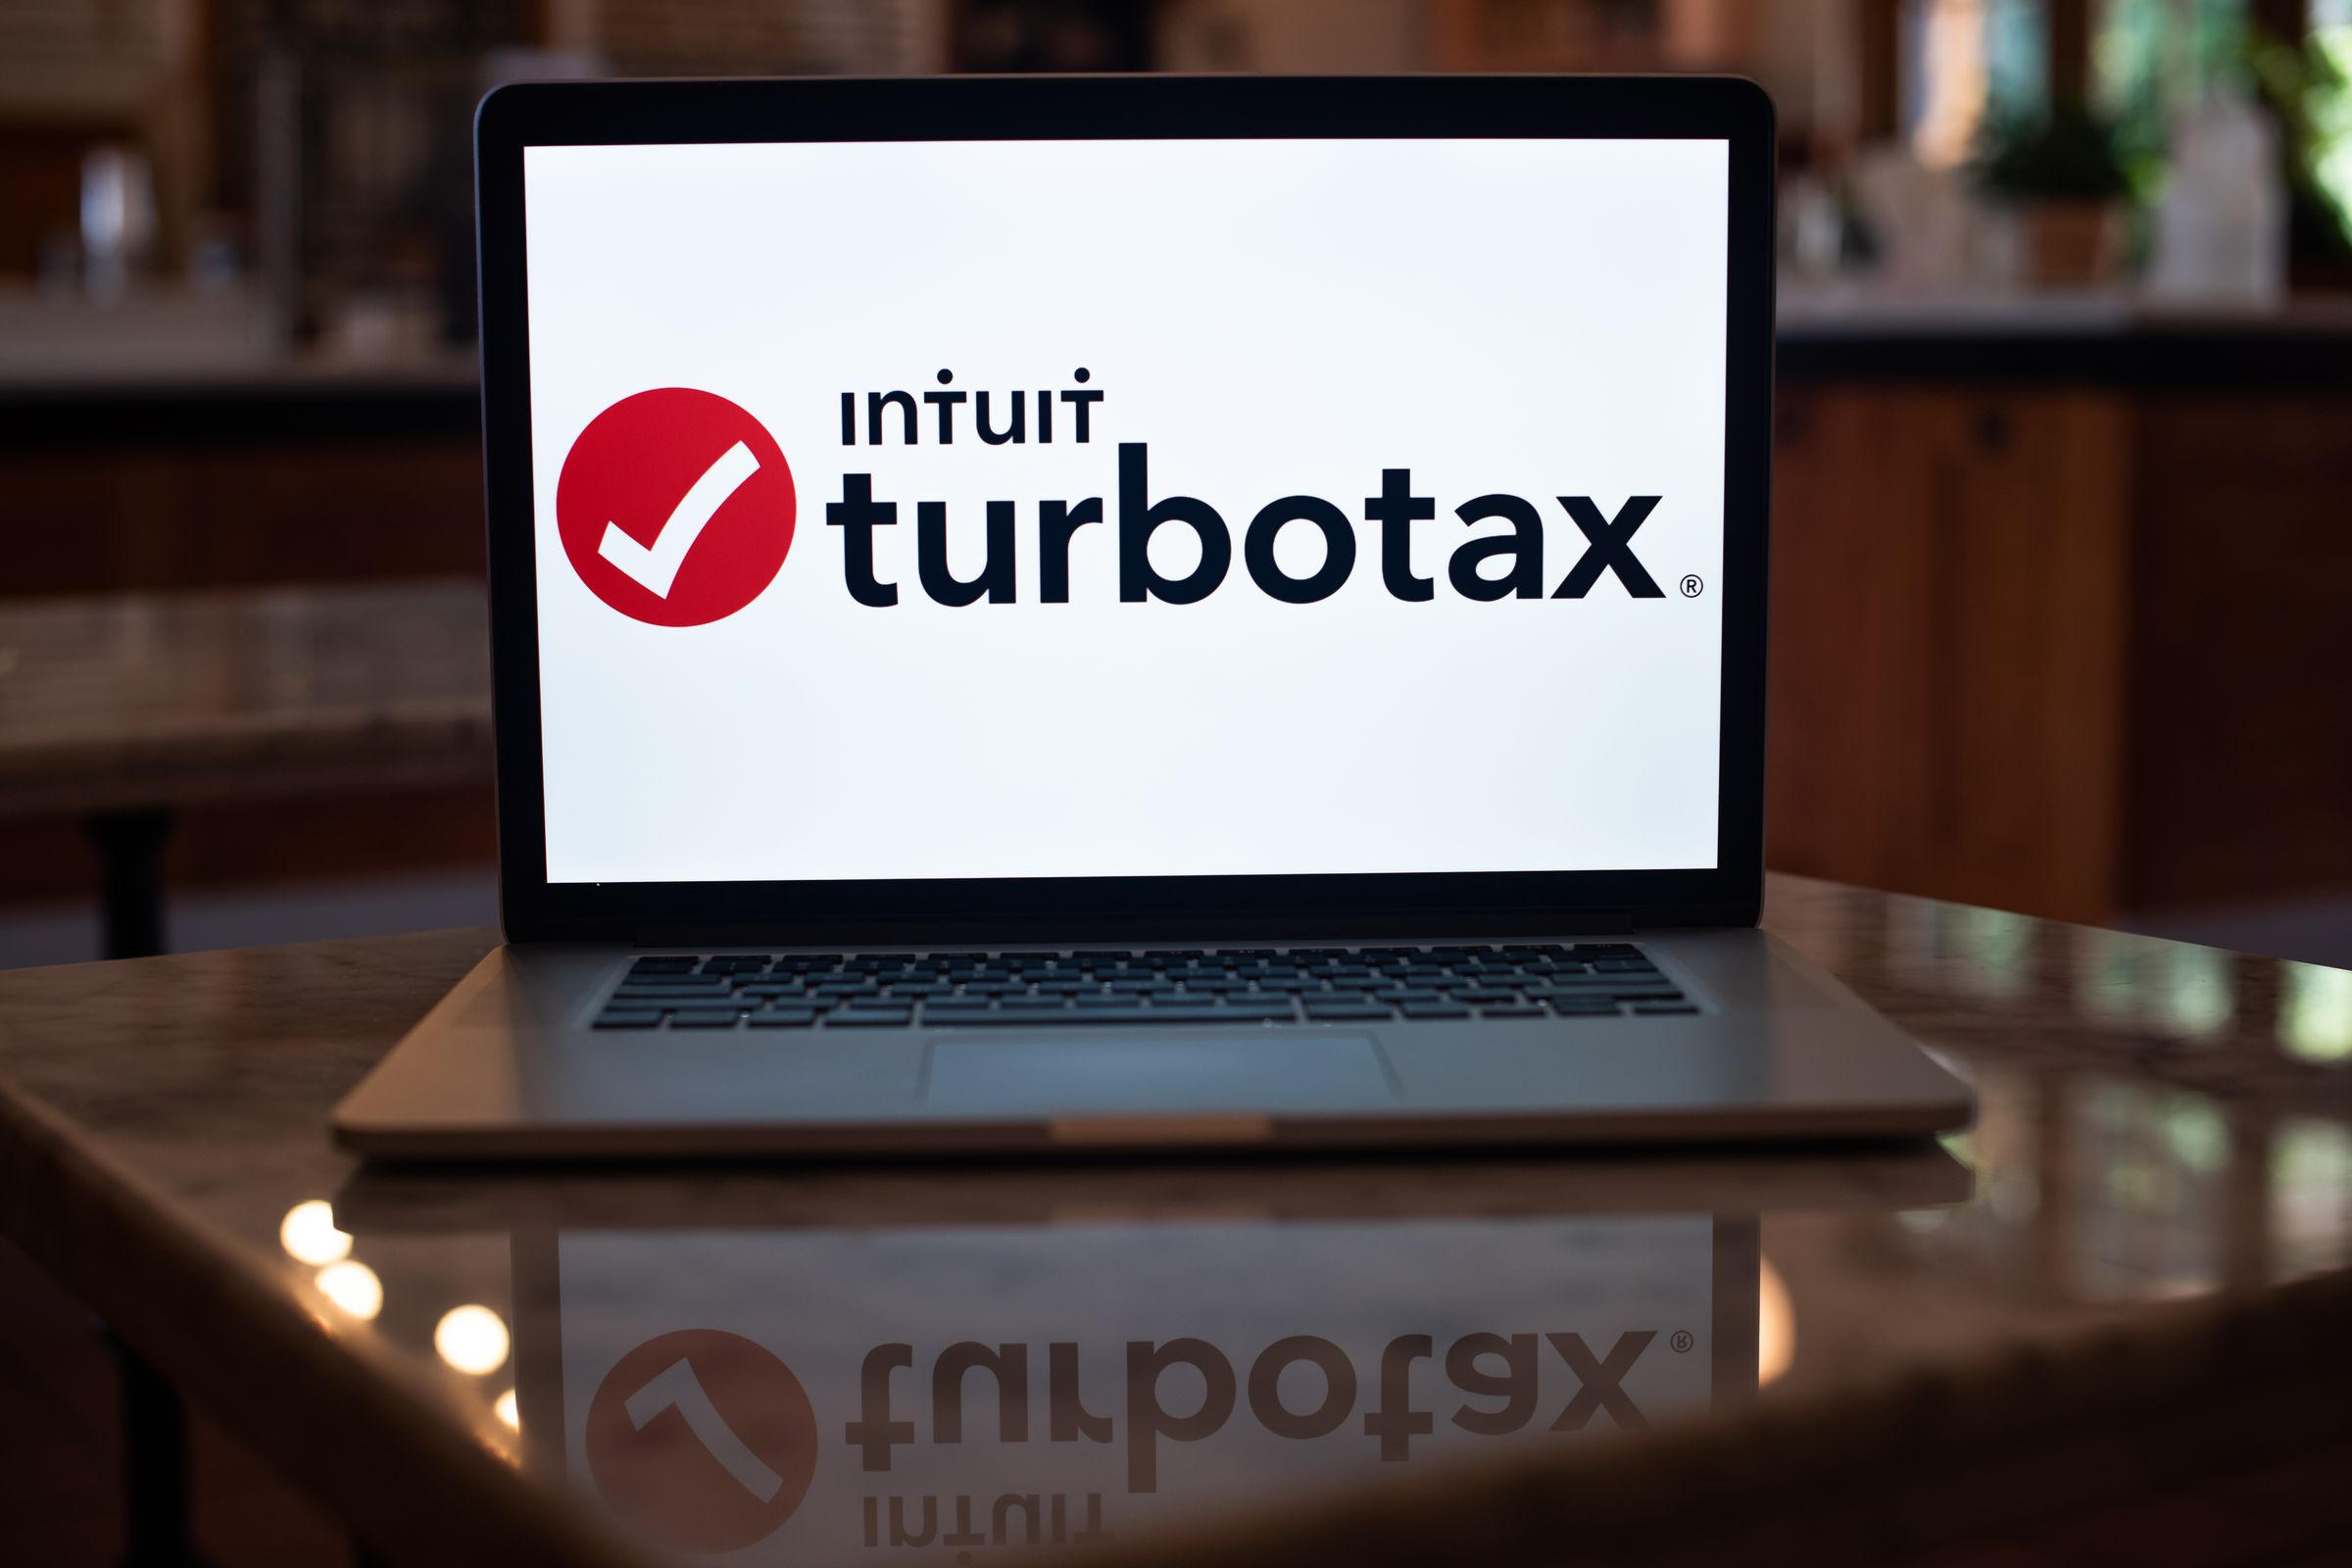 A photo showing the TurboTax logo on a laptop